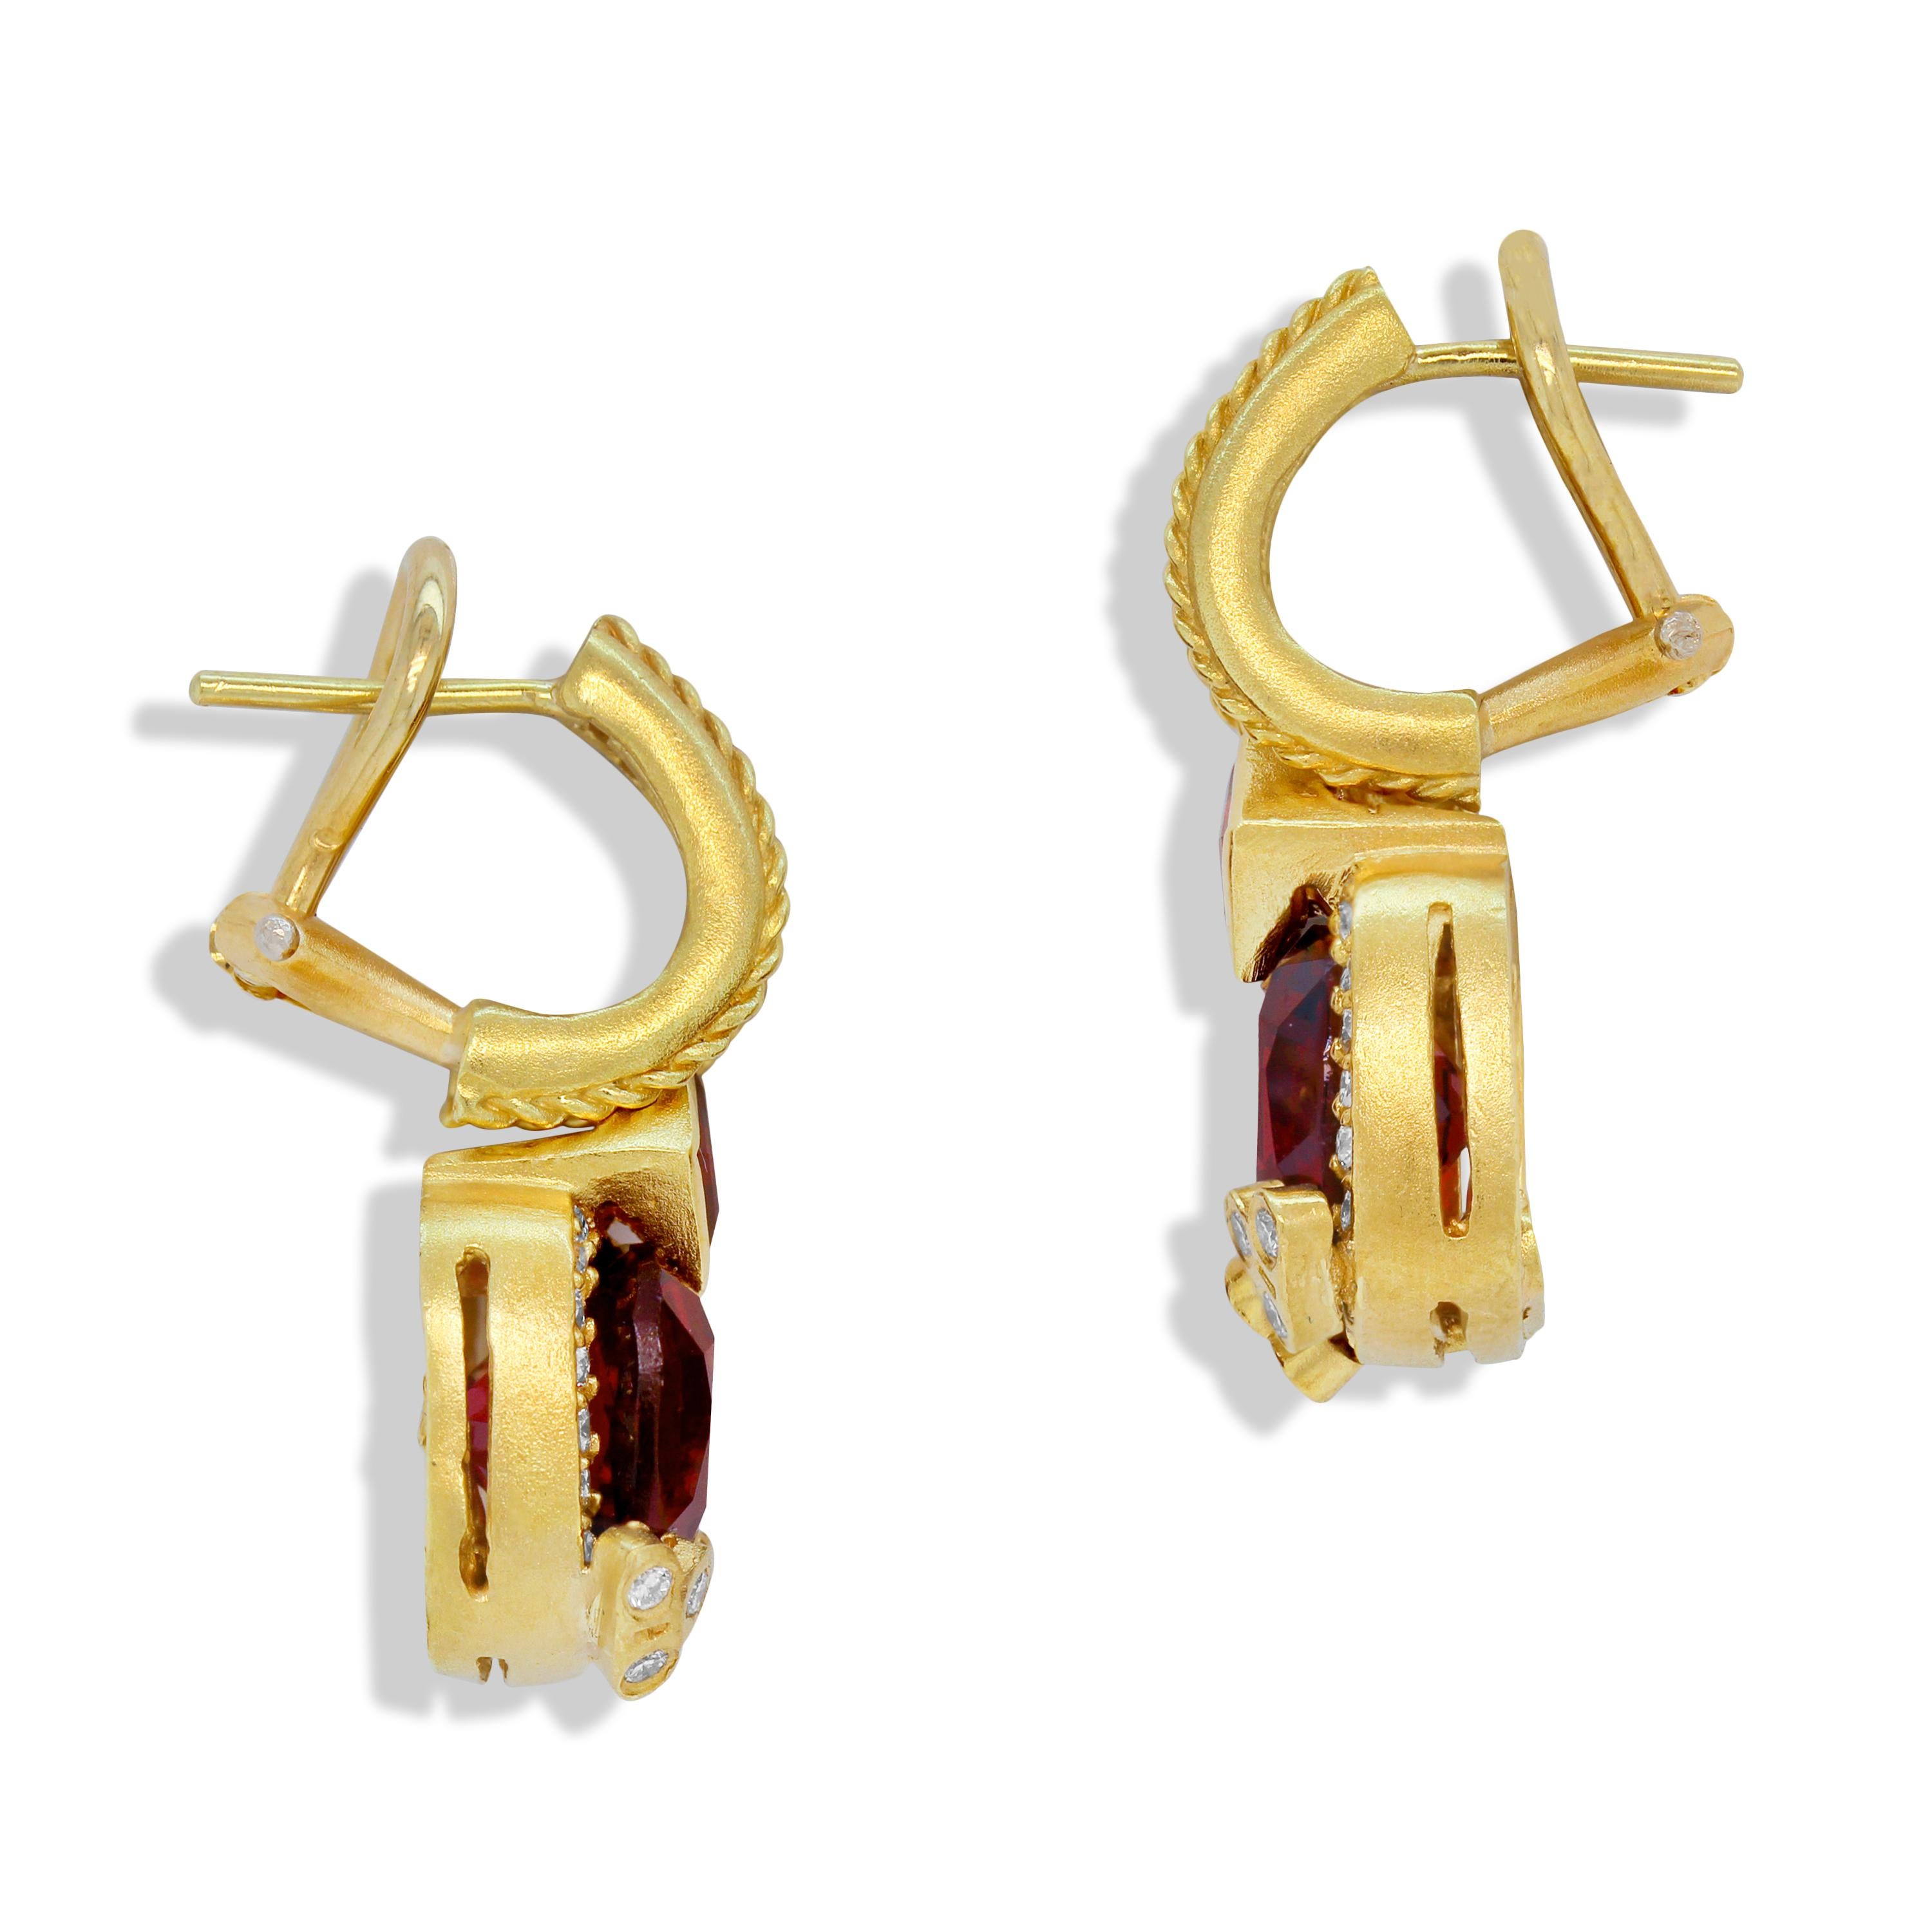 Stambolian 18K Gold Diamonds Red Garnet and Ruby Drop Dangle Earrings

Two exceptional Garnets are paired with gorgeous rubies and surrounded with diamonds.

6.08 carat apprx. Garnet total weight.
0.56 carat Ruby total weight.
0.58 carat G color, VS